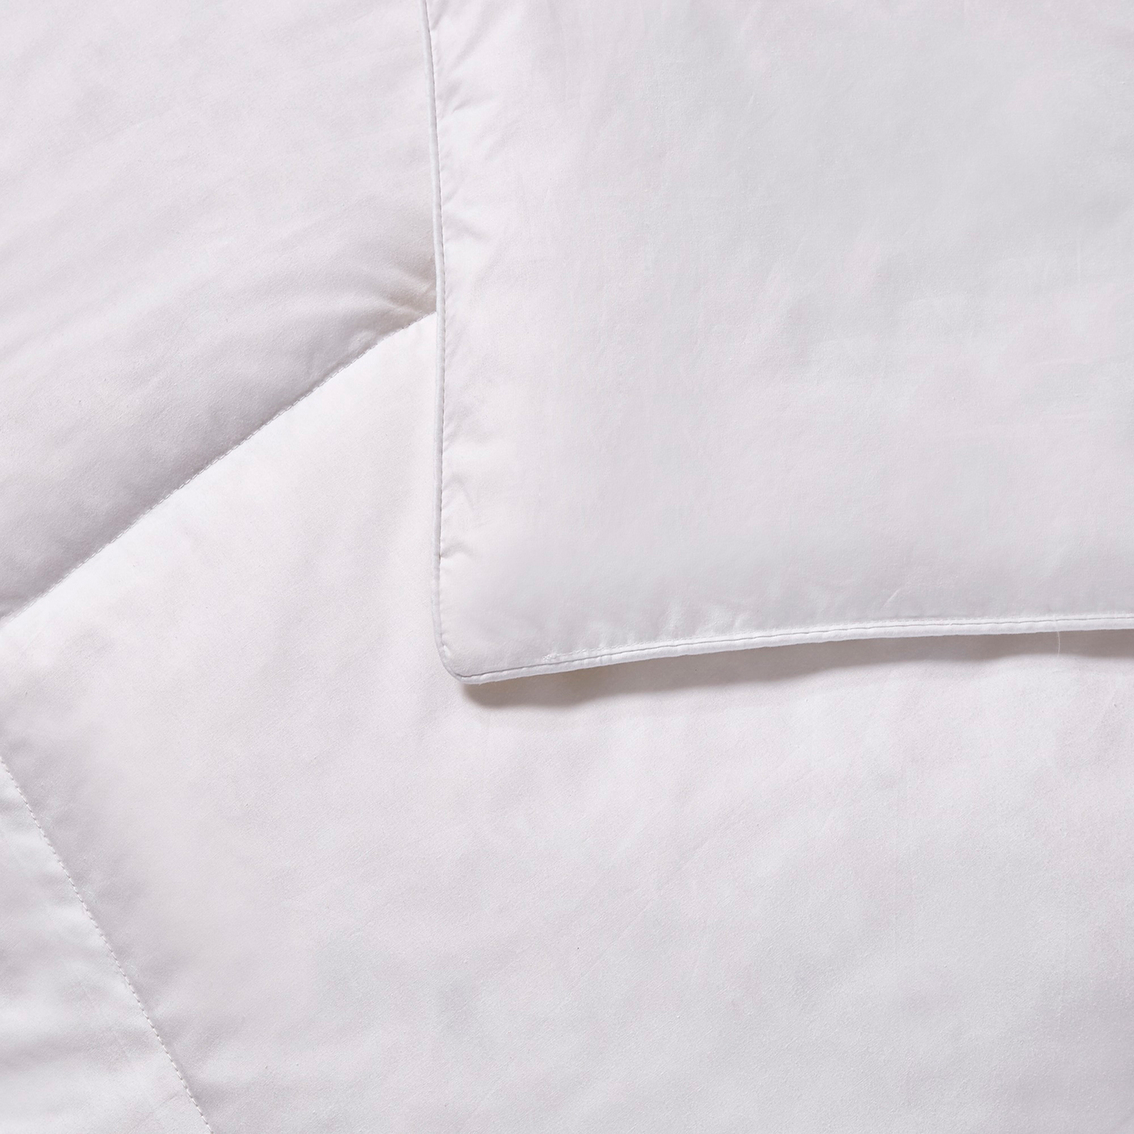 Kathy Ireland Home Essentials White Goose Feather and Down Comforter - Image 6 of 7